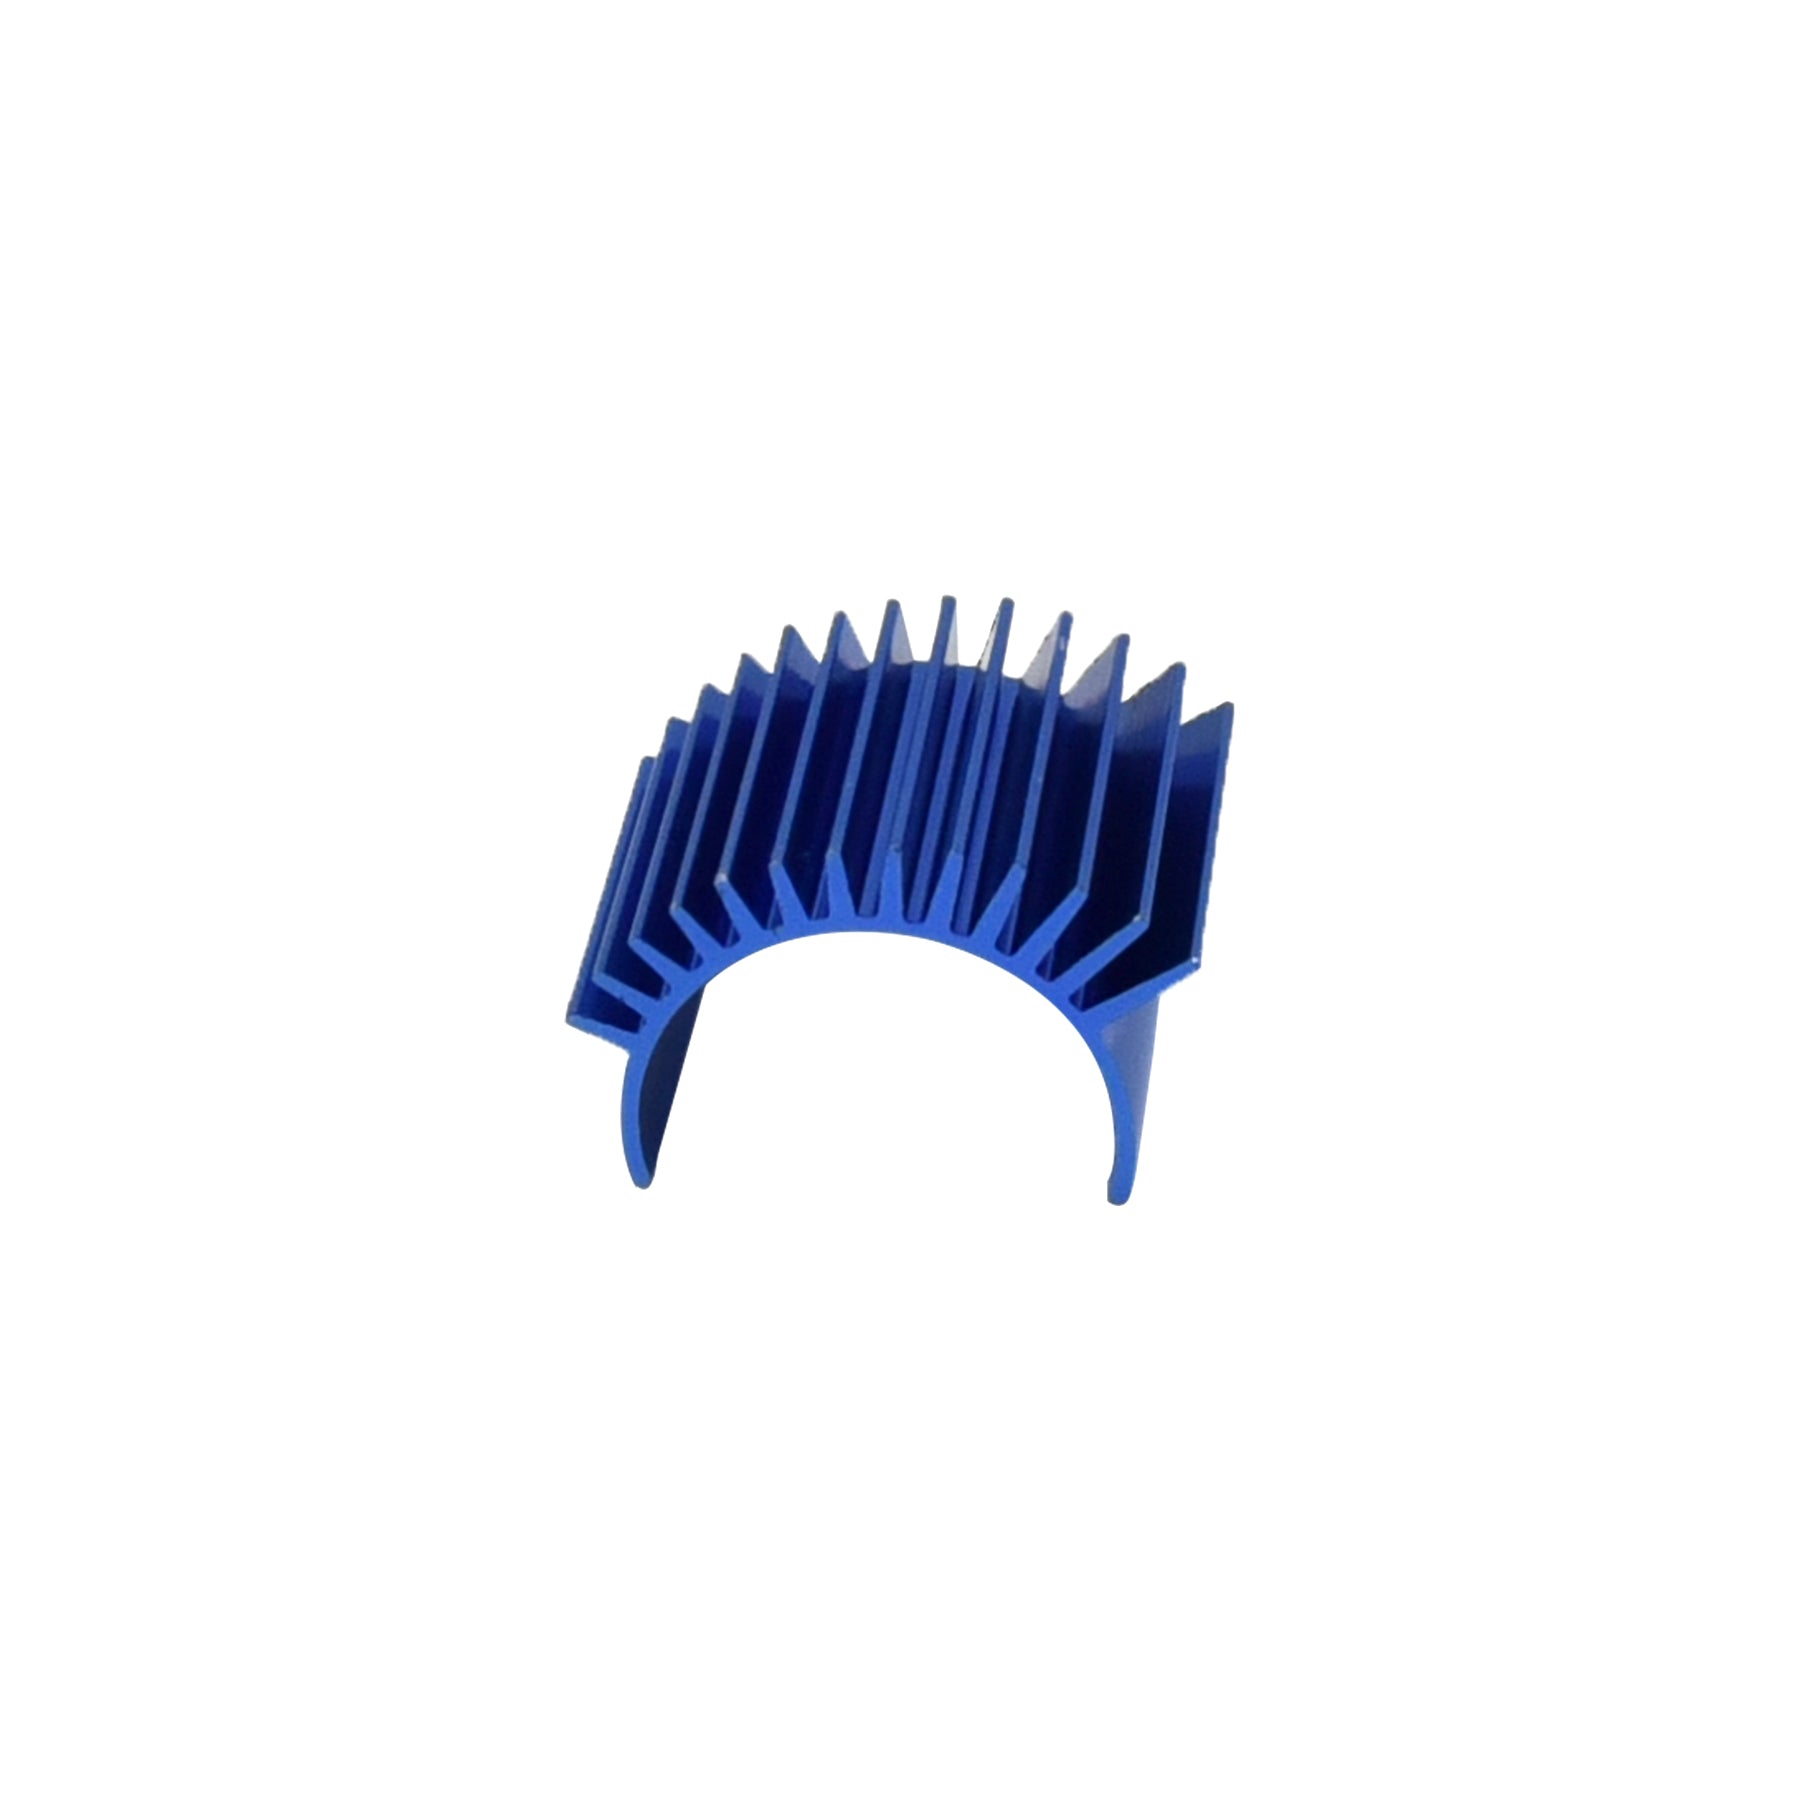 HOSIM RC Car Heat Sink 1:16 Scale 16396 for RC H07 Monster Truck